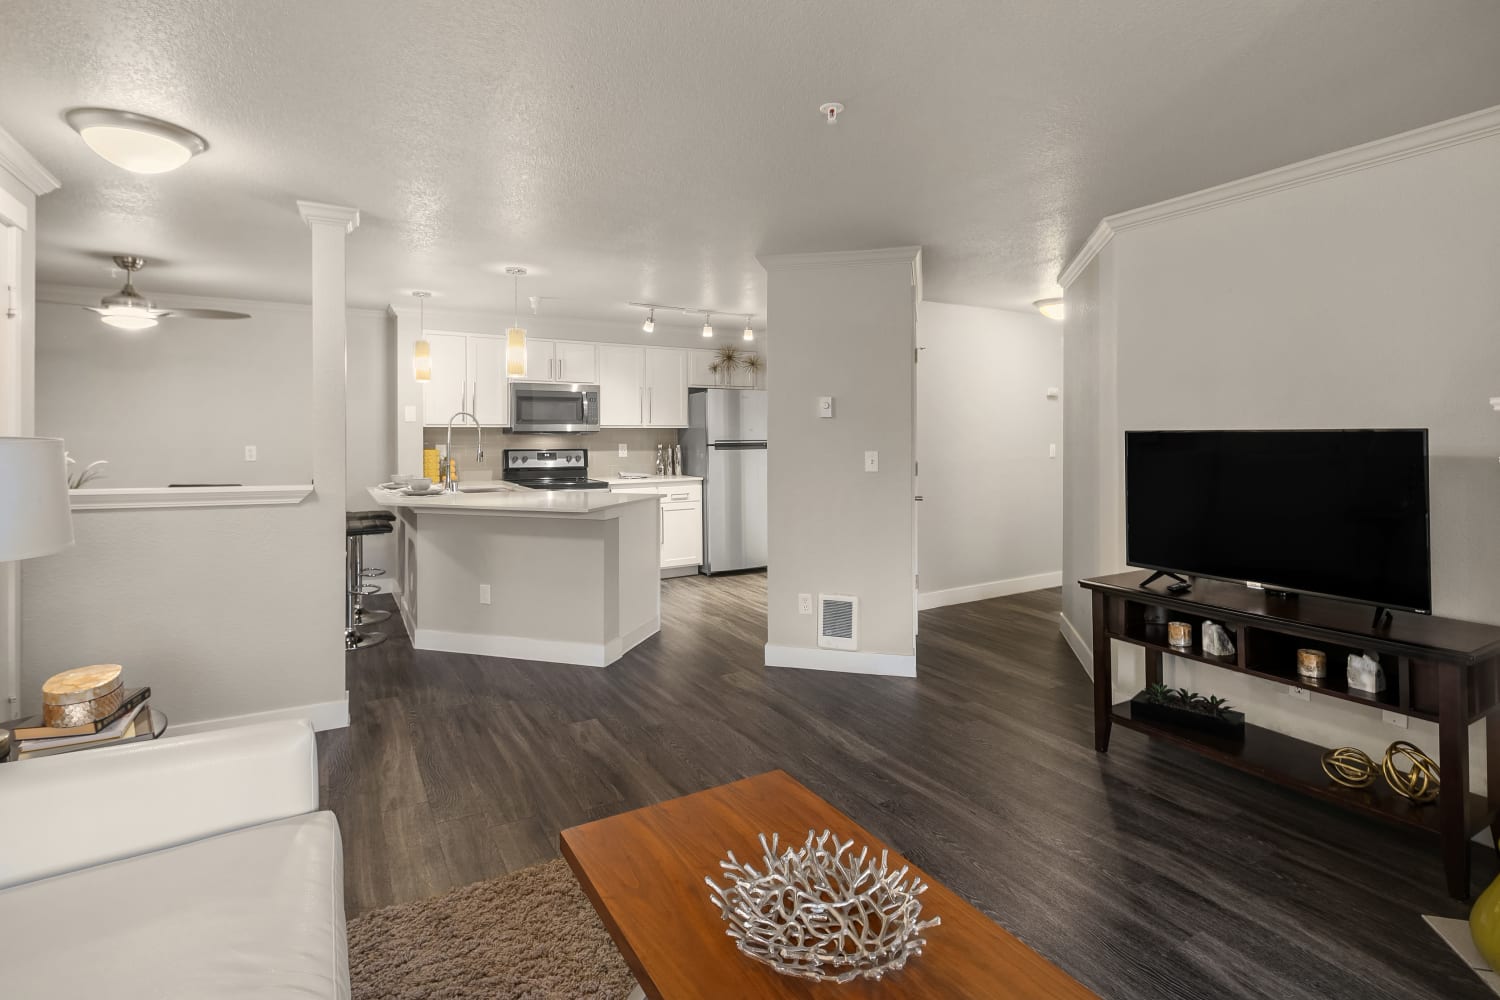 A spacious apartment kitchen and living room at Overlook at Lakemont in Bellevue, Washington